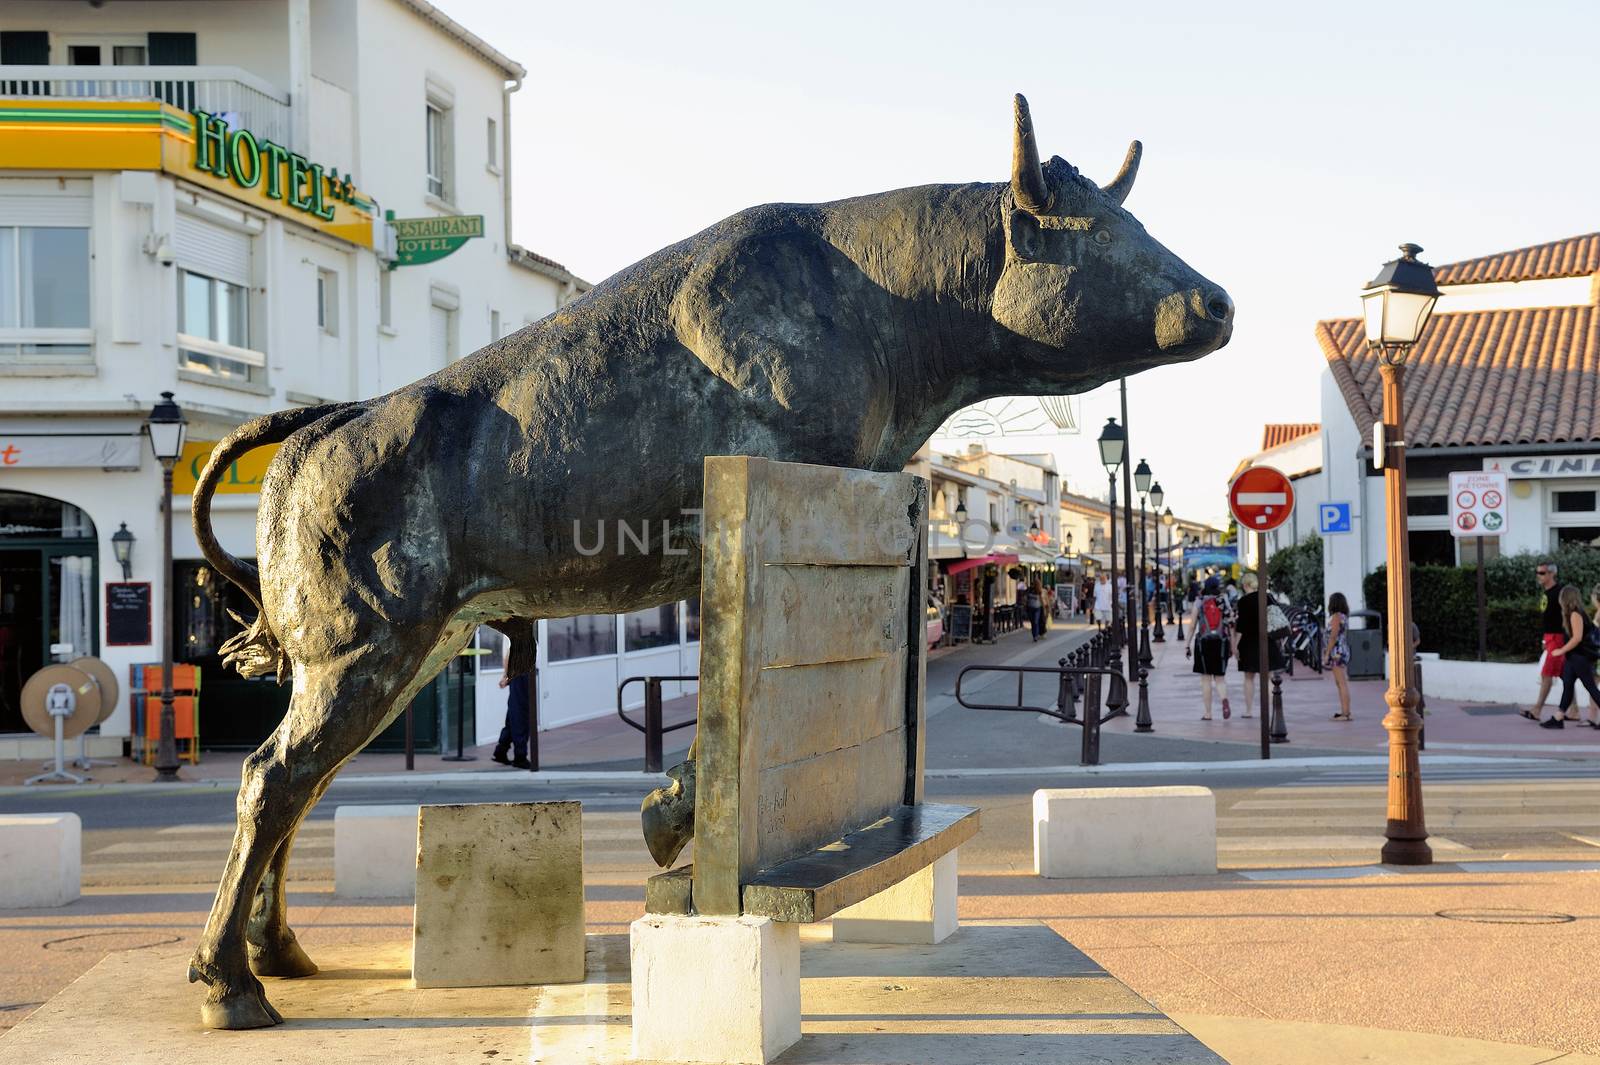 Vovo bull sculpture in the town of Saintes-Married-de-la-Mer in the Camargue center